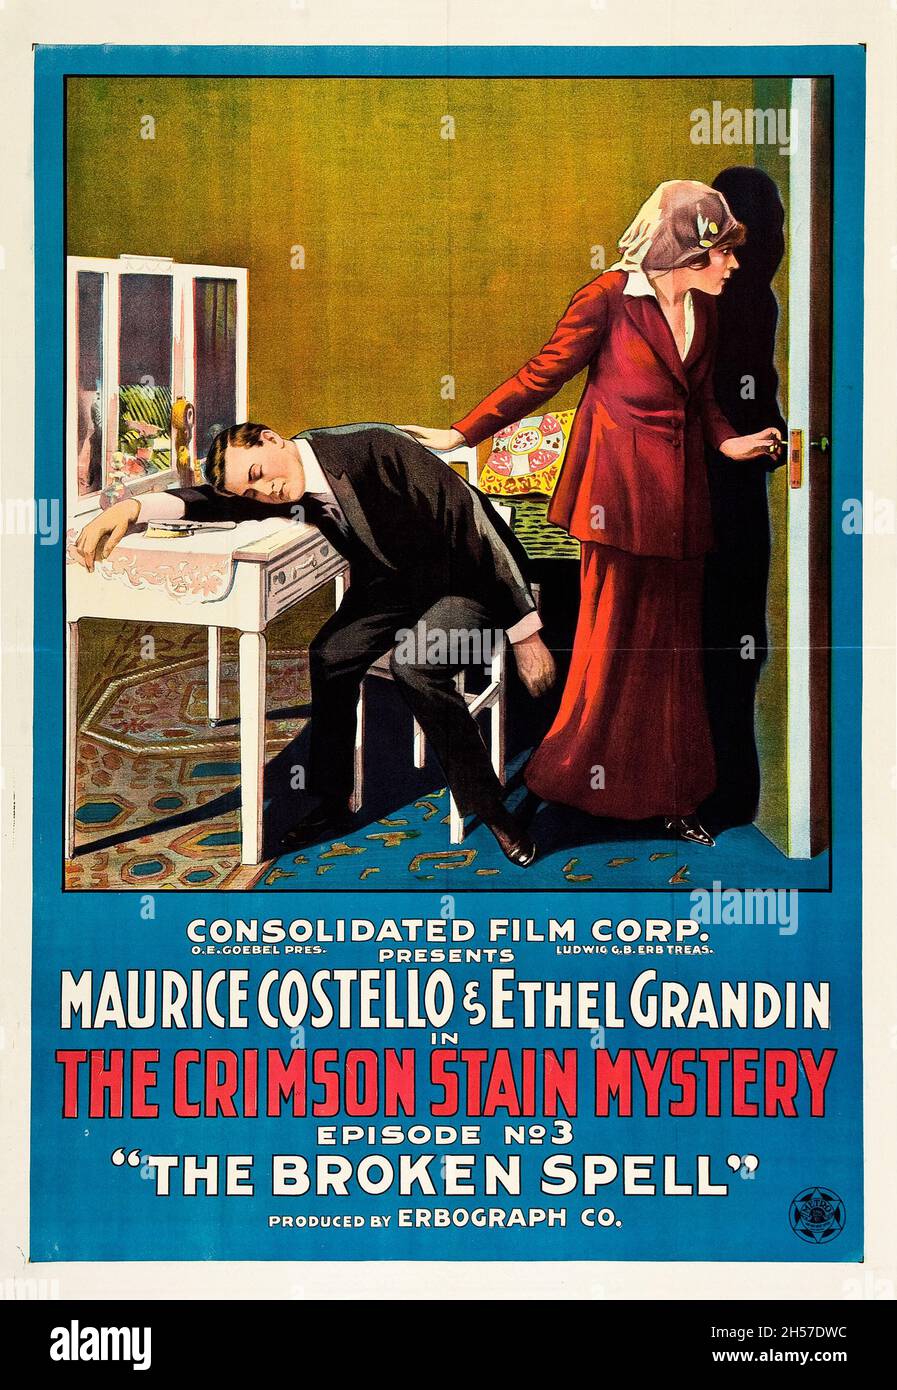 The Crimson Stain Mystery (Consolidated, 1916) - Old and vintage movie poster feat Maurice Costello & Ethel Grandin. Ep 3. The Broken Spell. Stock Photo